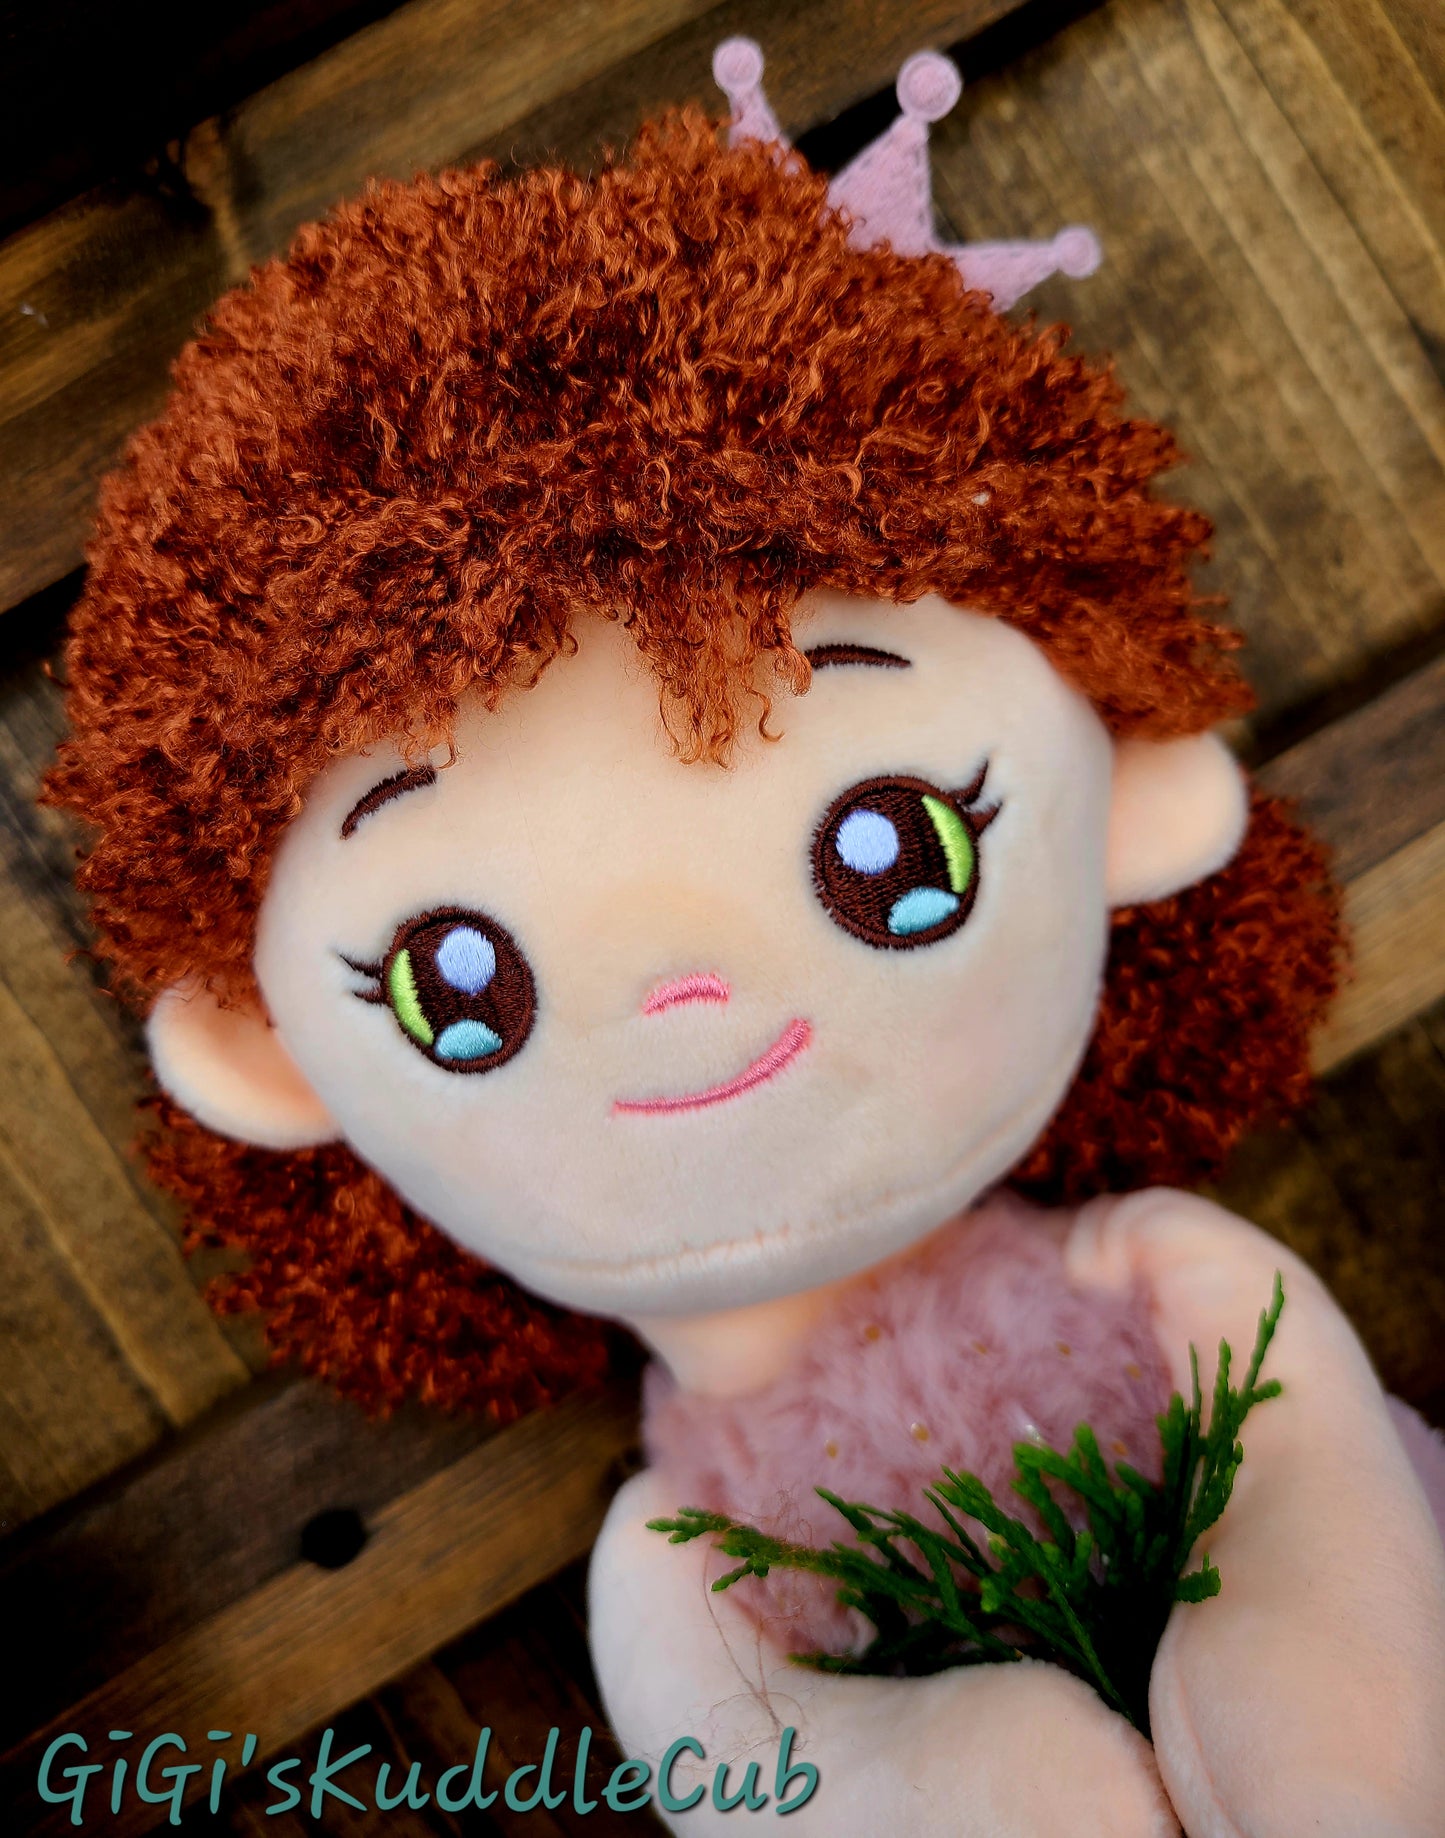 Soft Plush 15in Curly Red Hair Ballerina Princess Rag Doll Plush Toy/ Decor/Handmade Baby Gift Toy